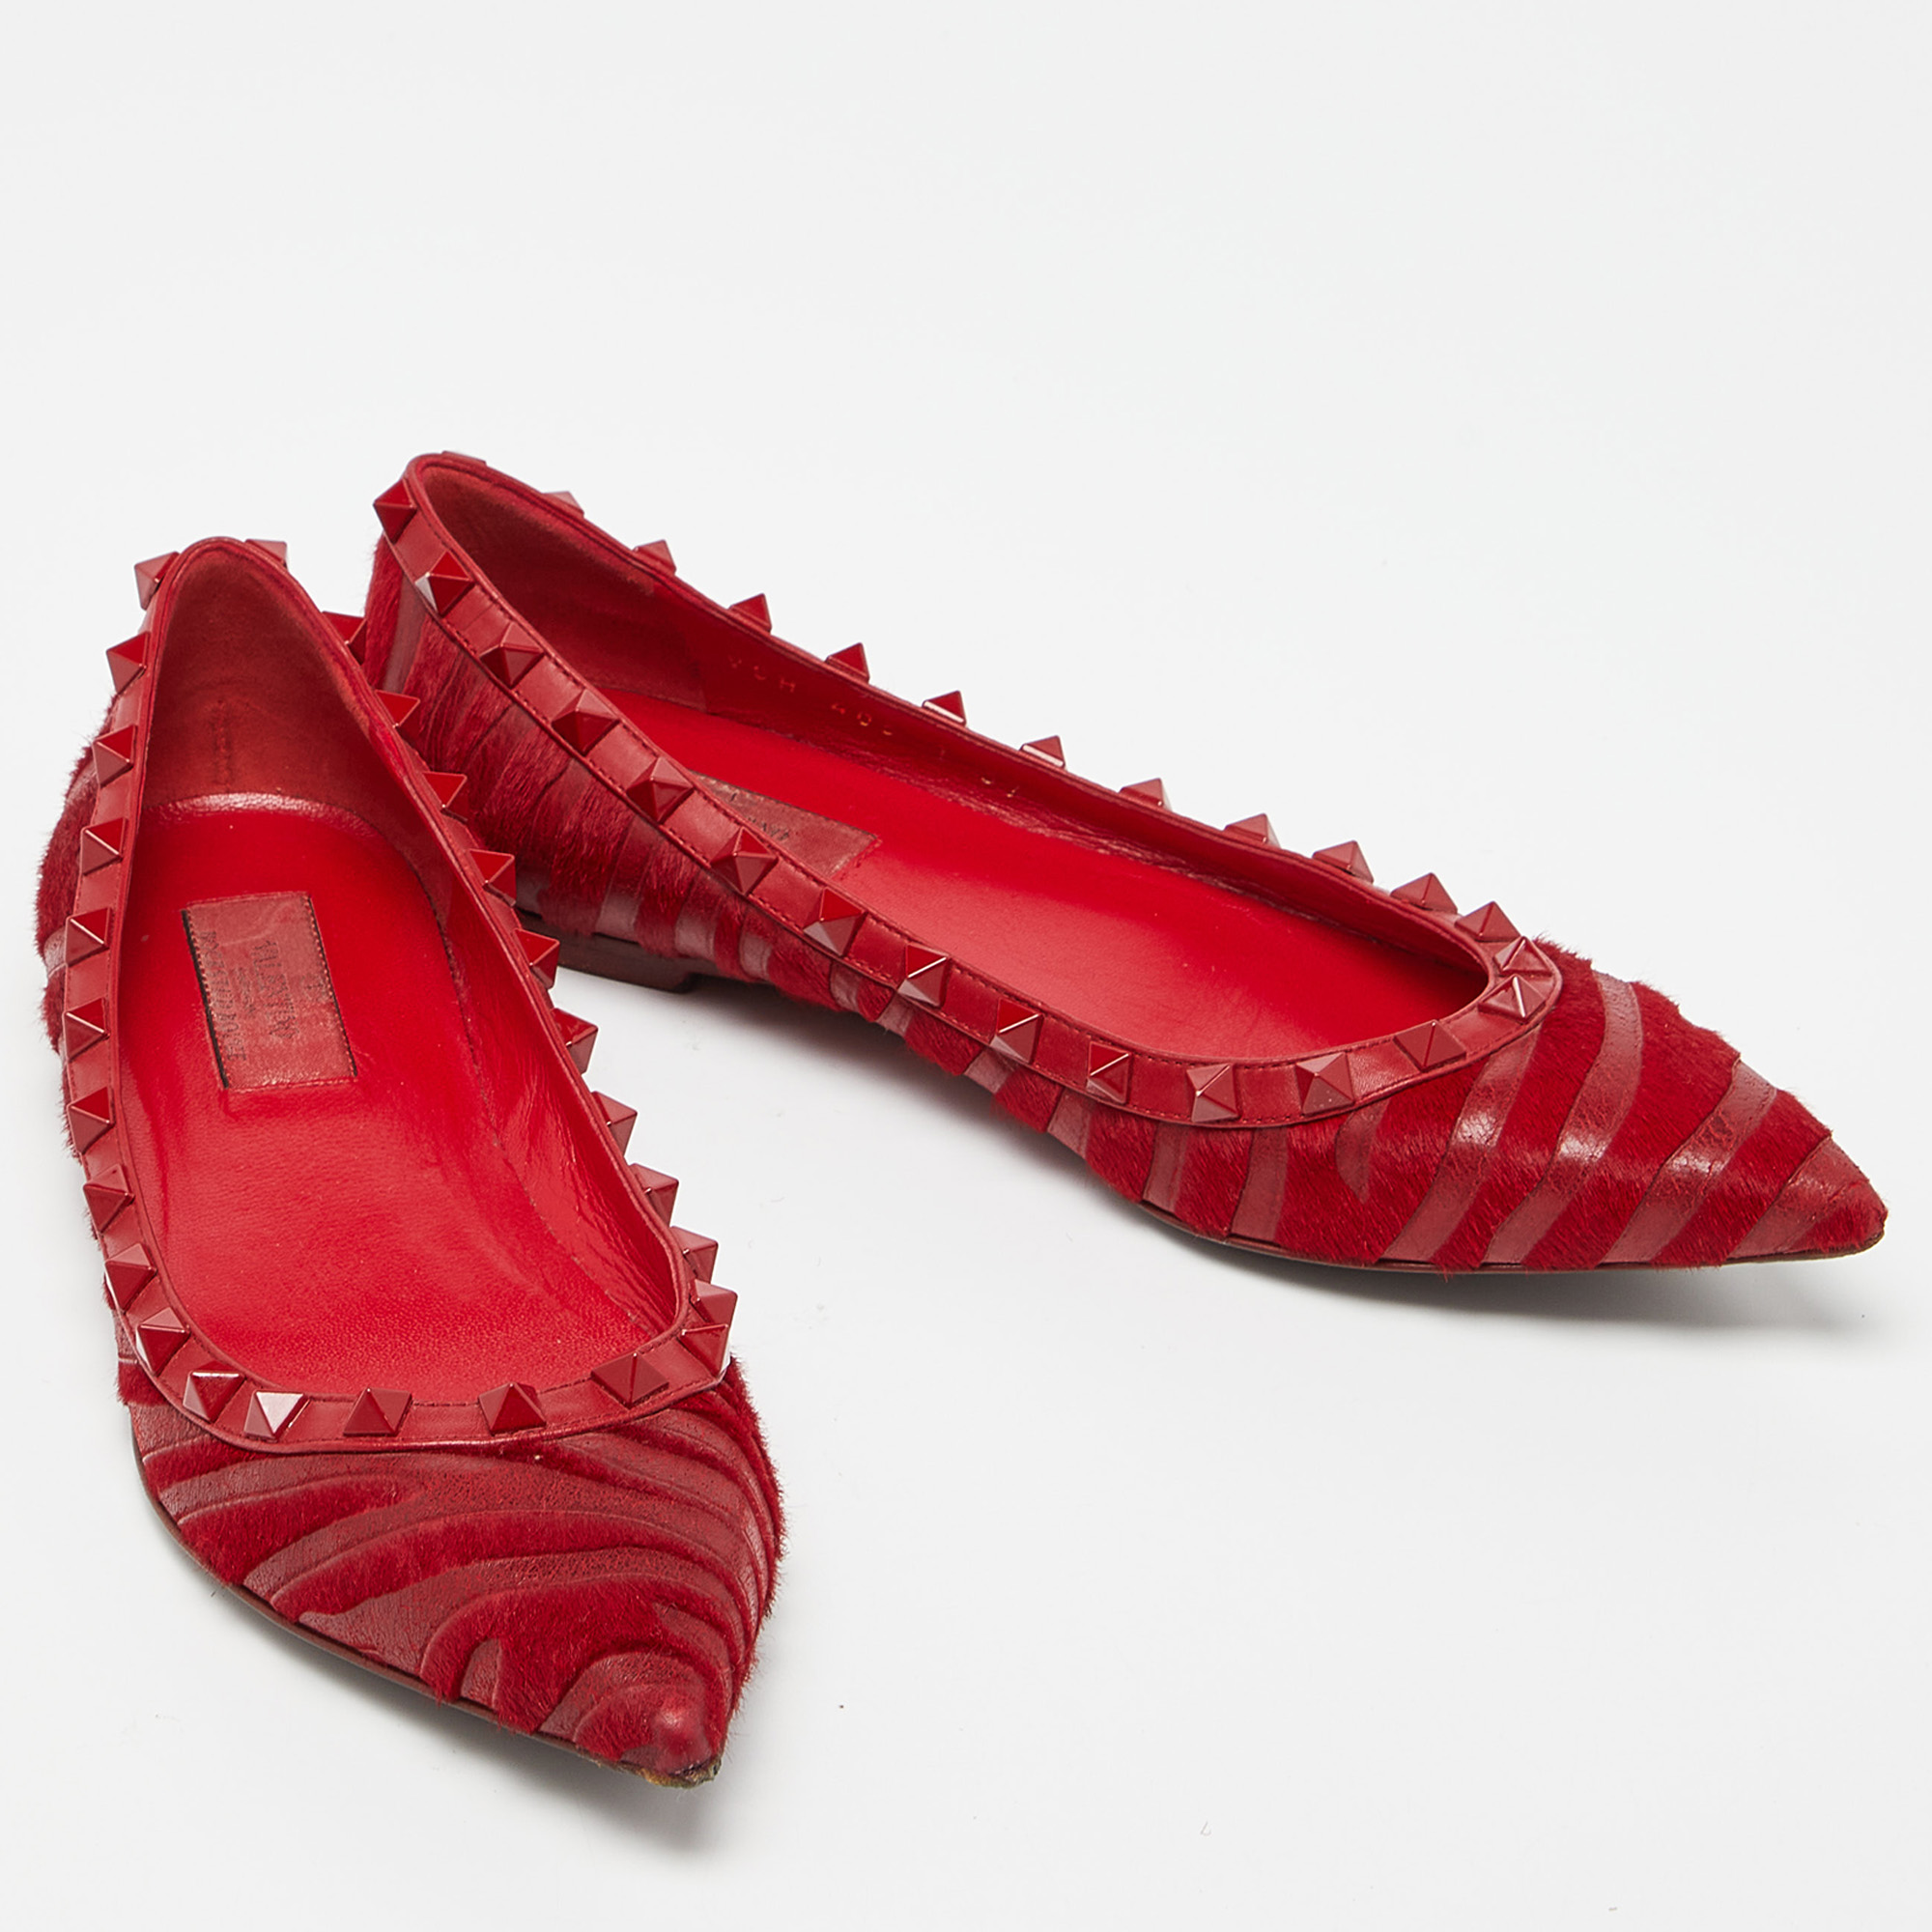 Valentino Red Calfhair And Leather Studded Ballet Flats Size 37